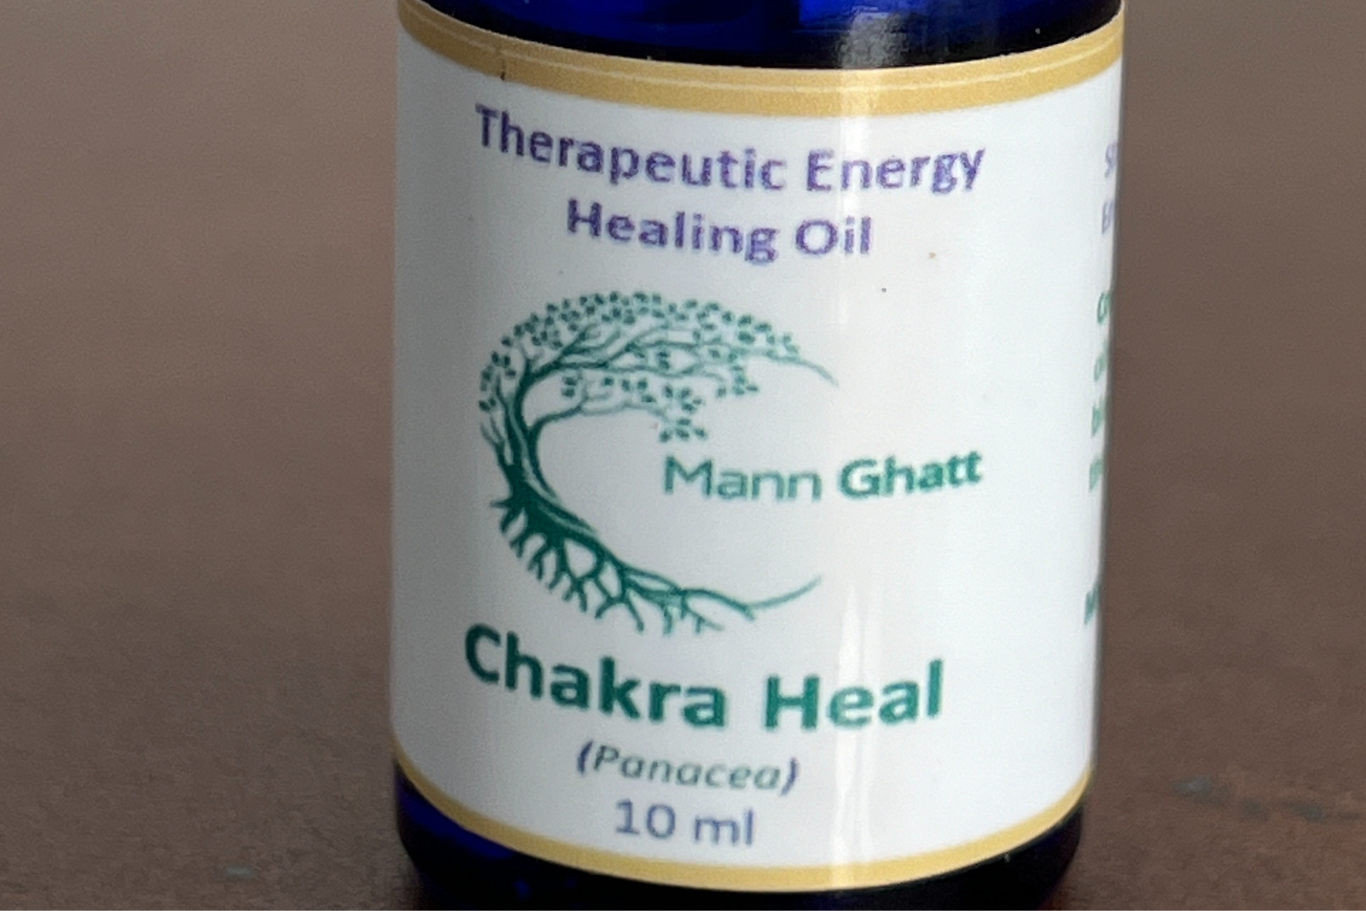 Chakra Heal Oil: The Panacea for Various Health Conditions